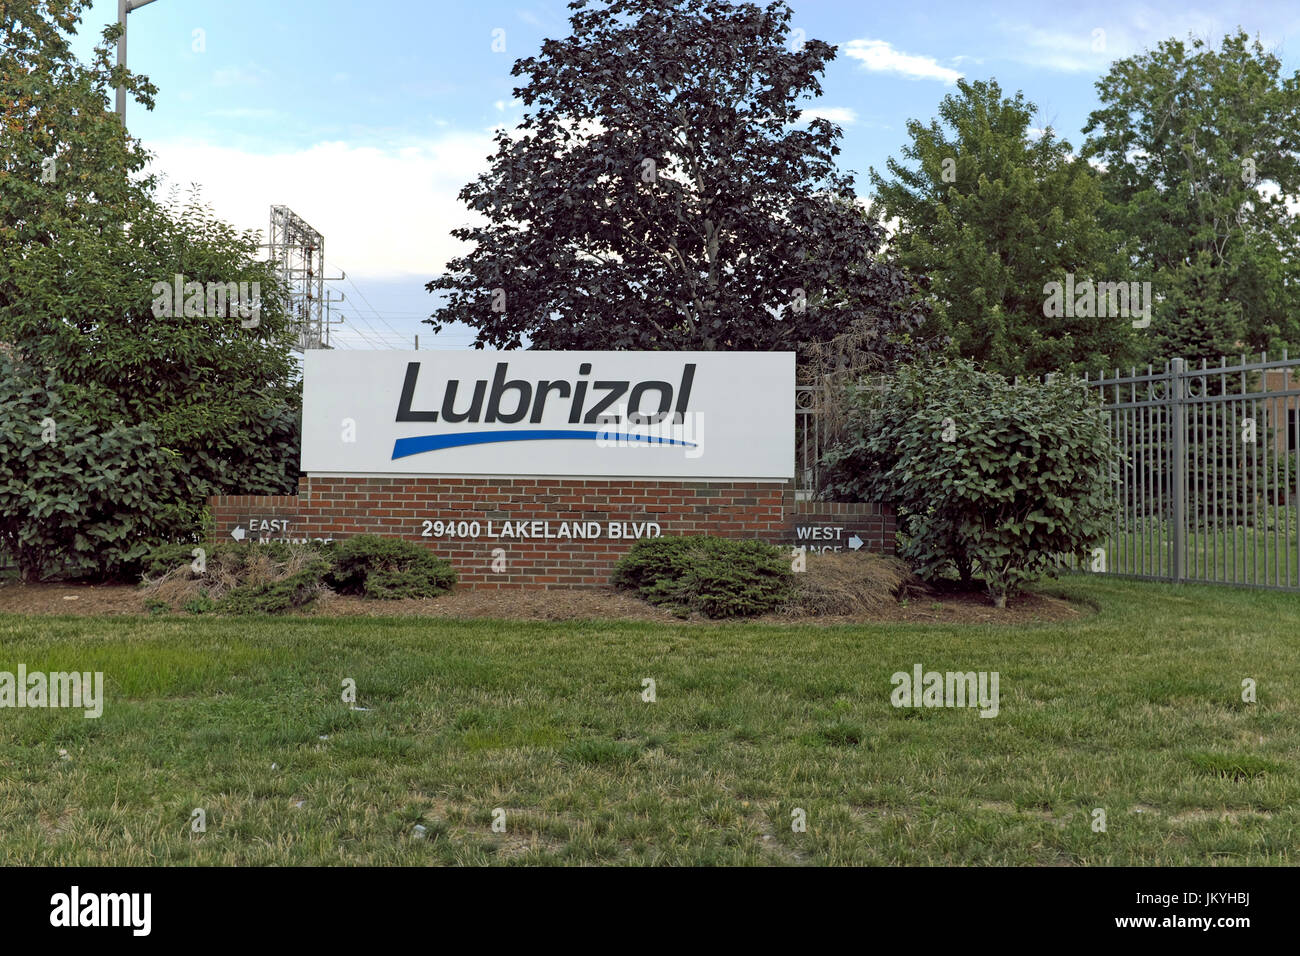 The Lubrizol Corporation, a subsidiary of Berkishire Hathaway, corporate headquarters on Lakeland Blvd. in Wickliffe, Ohio, USA. Stock Photo